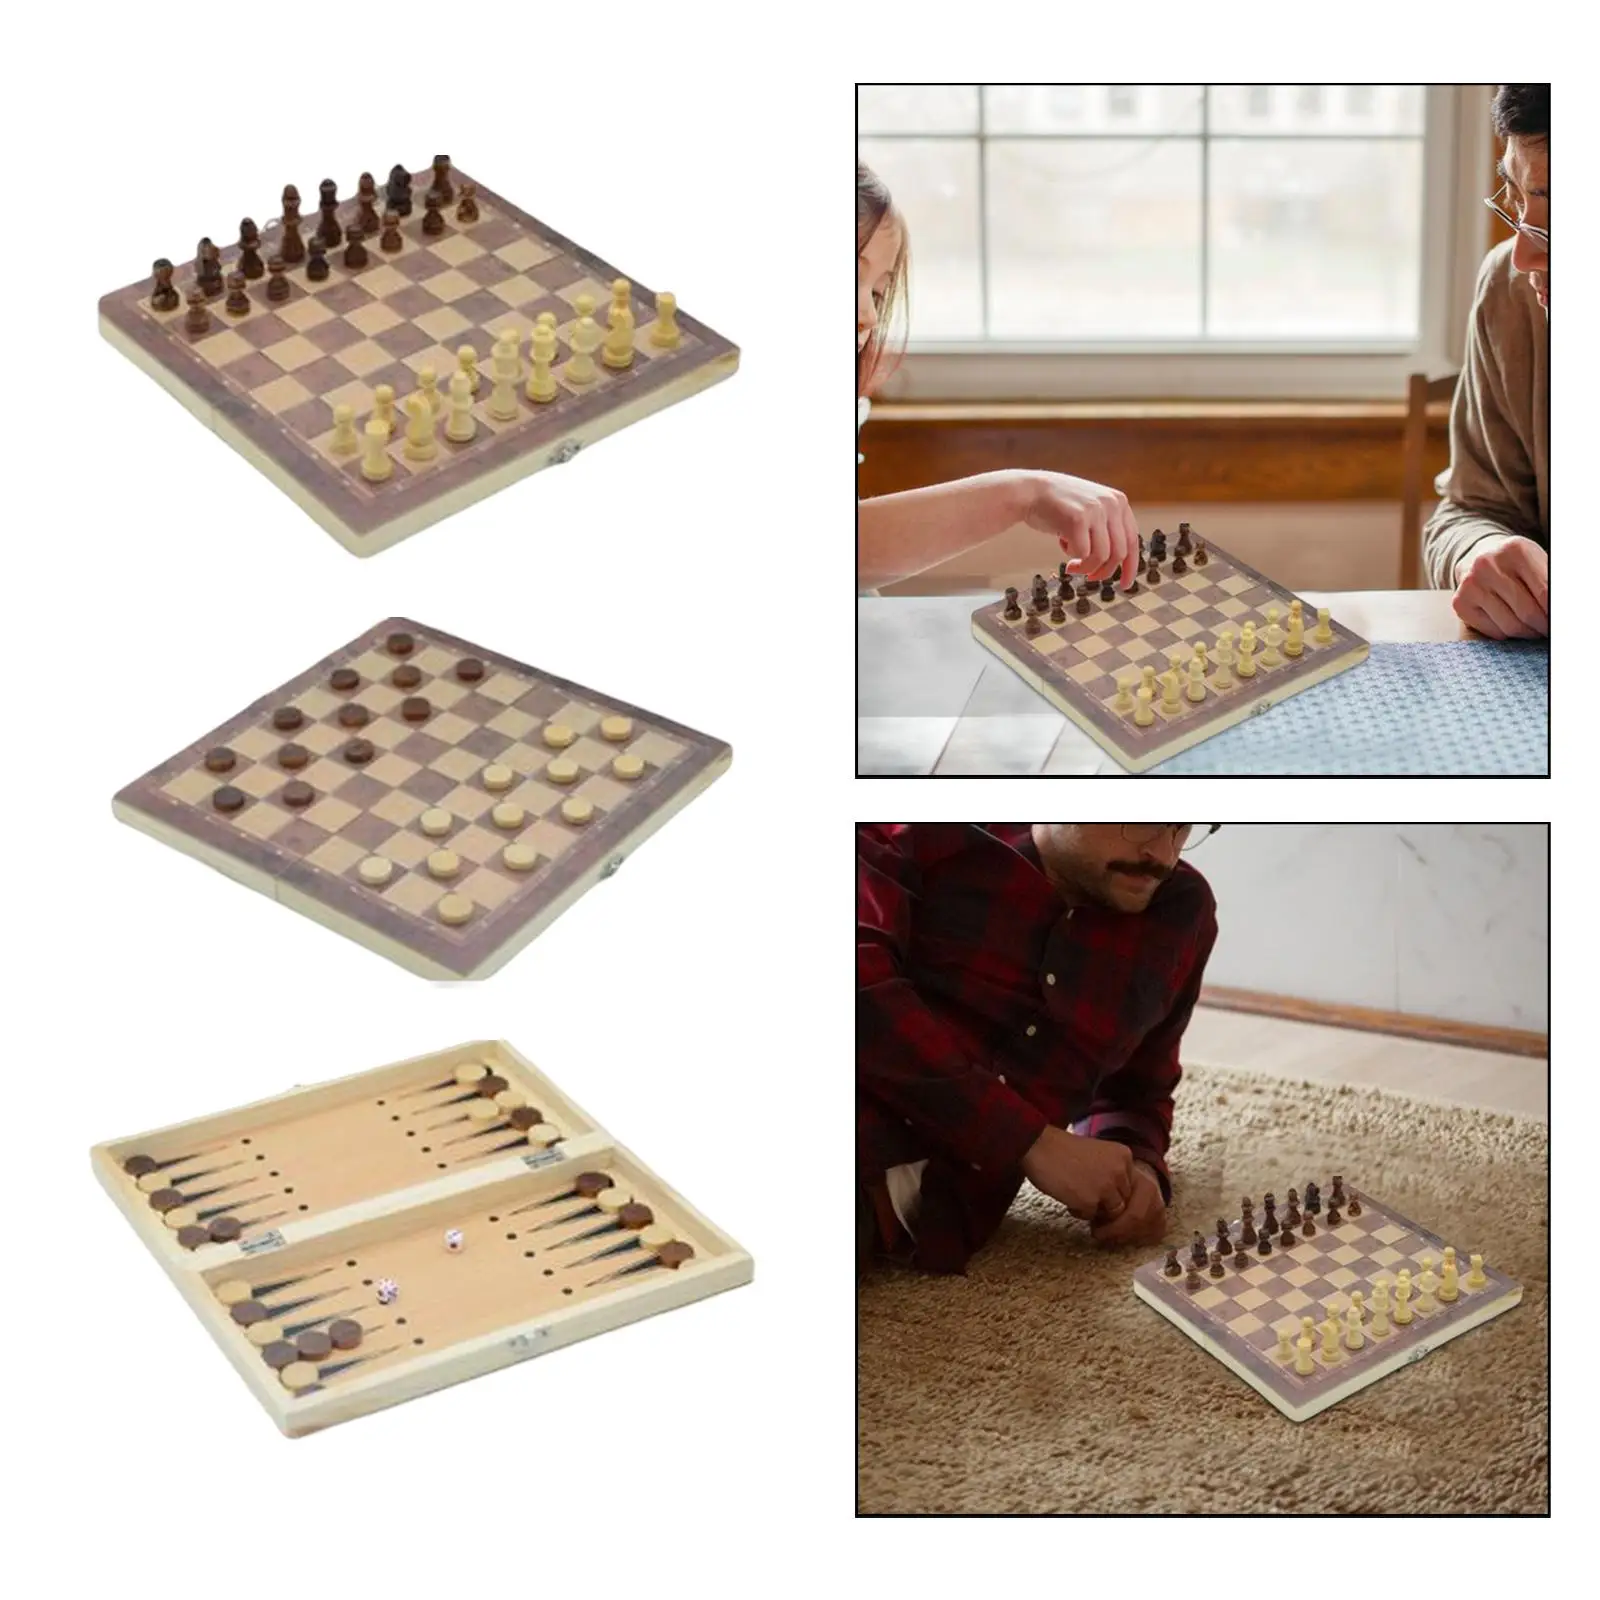 Chess Set Folding Chess Game Travel Case Lightweight Chess Checkers Backgammon Sets Board Games for Indoor Travel Home